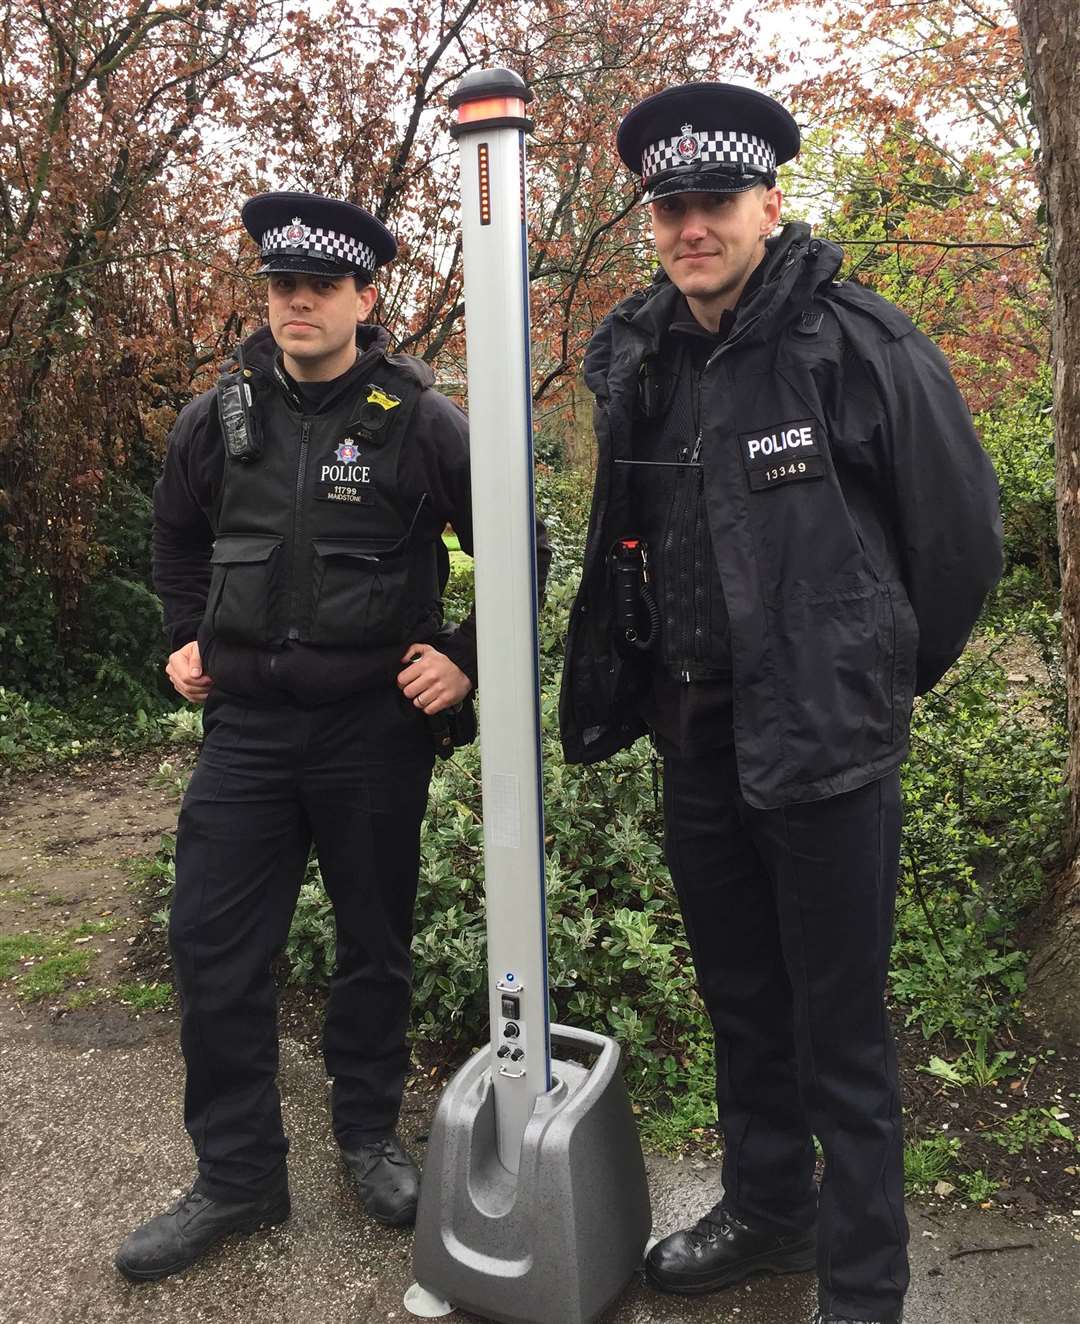 PCs with the knife bar set up in Brenchley Gardens in April 2019 as part of a crackdown on knife crime